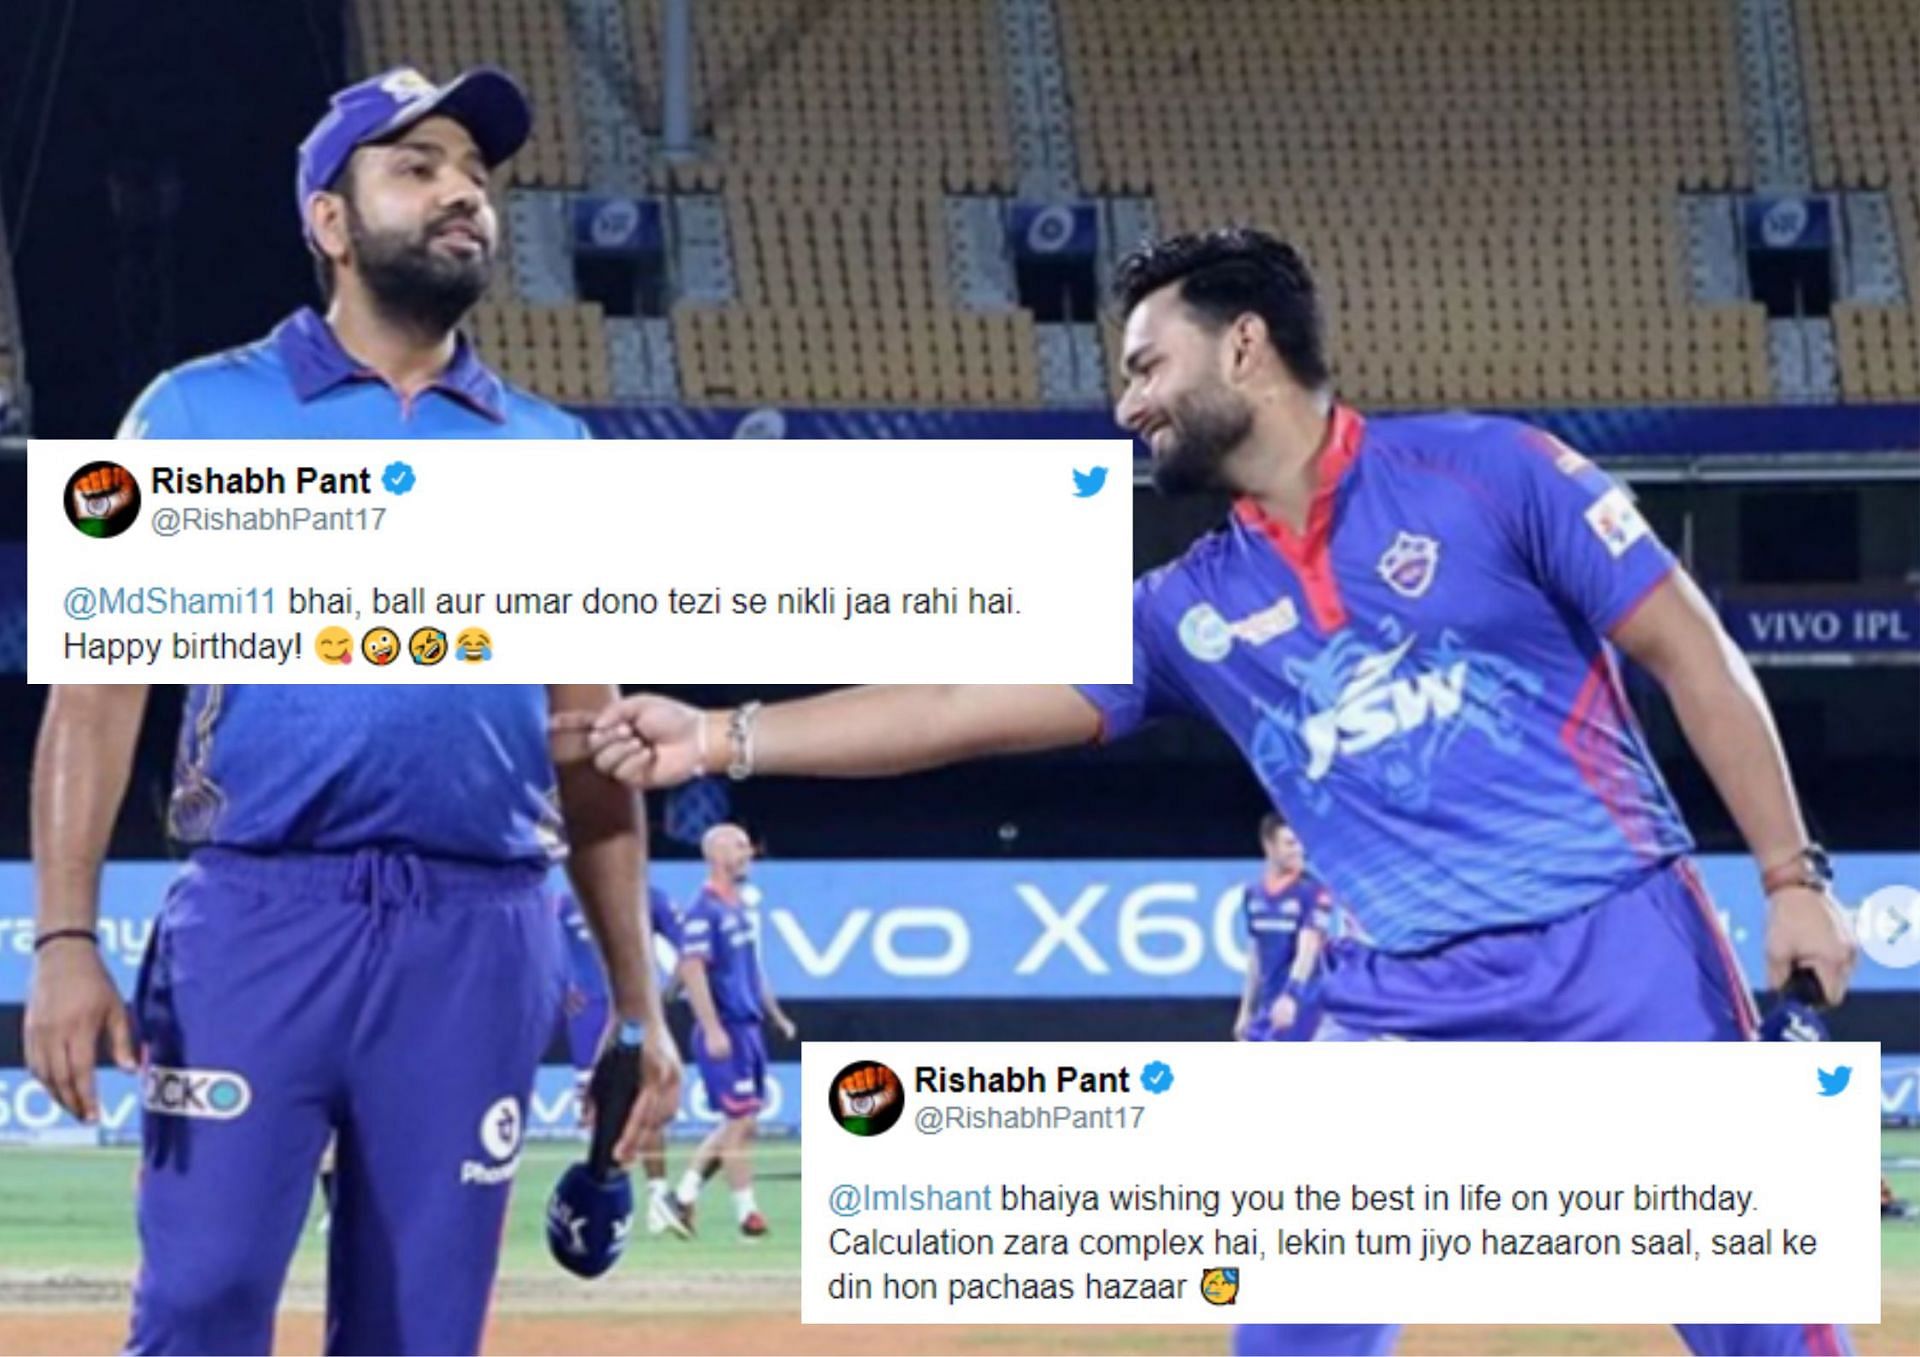 Rishabh Pant has his own unique manner of wishing his teammates on their birthday!